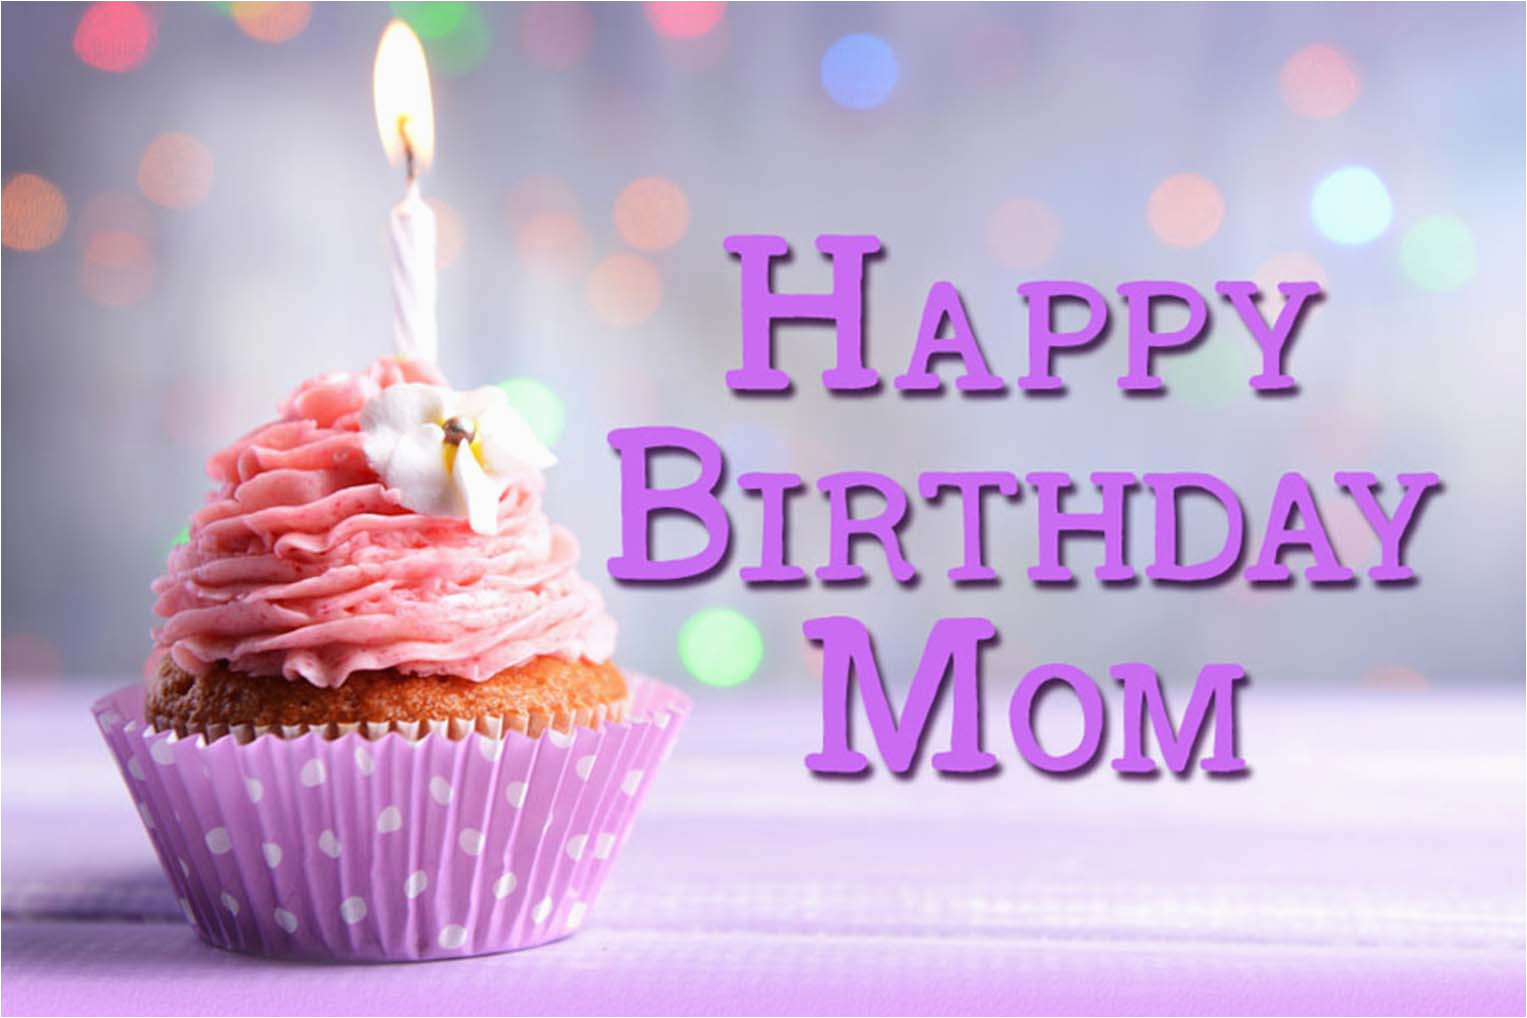 Happy Birthday Mom Pictures and Quotes 35 Happy Birthday Mom Quotes Birthday Wishes for Mom